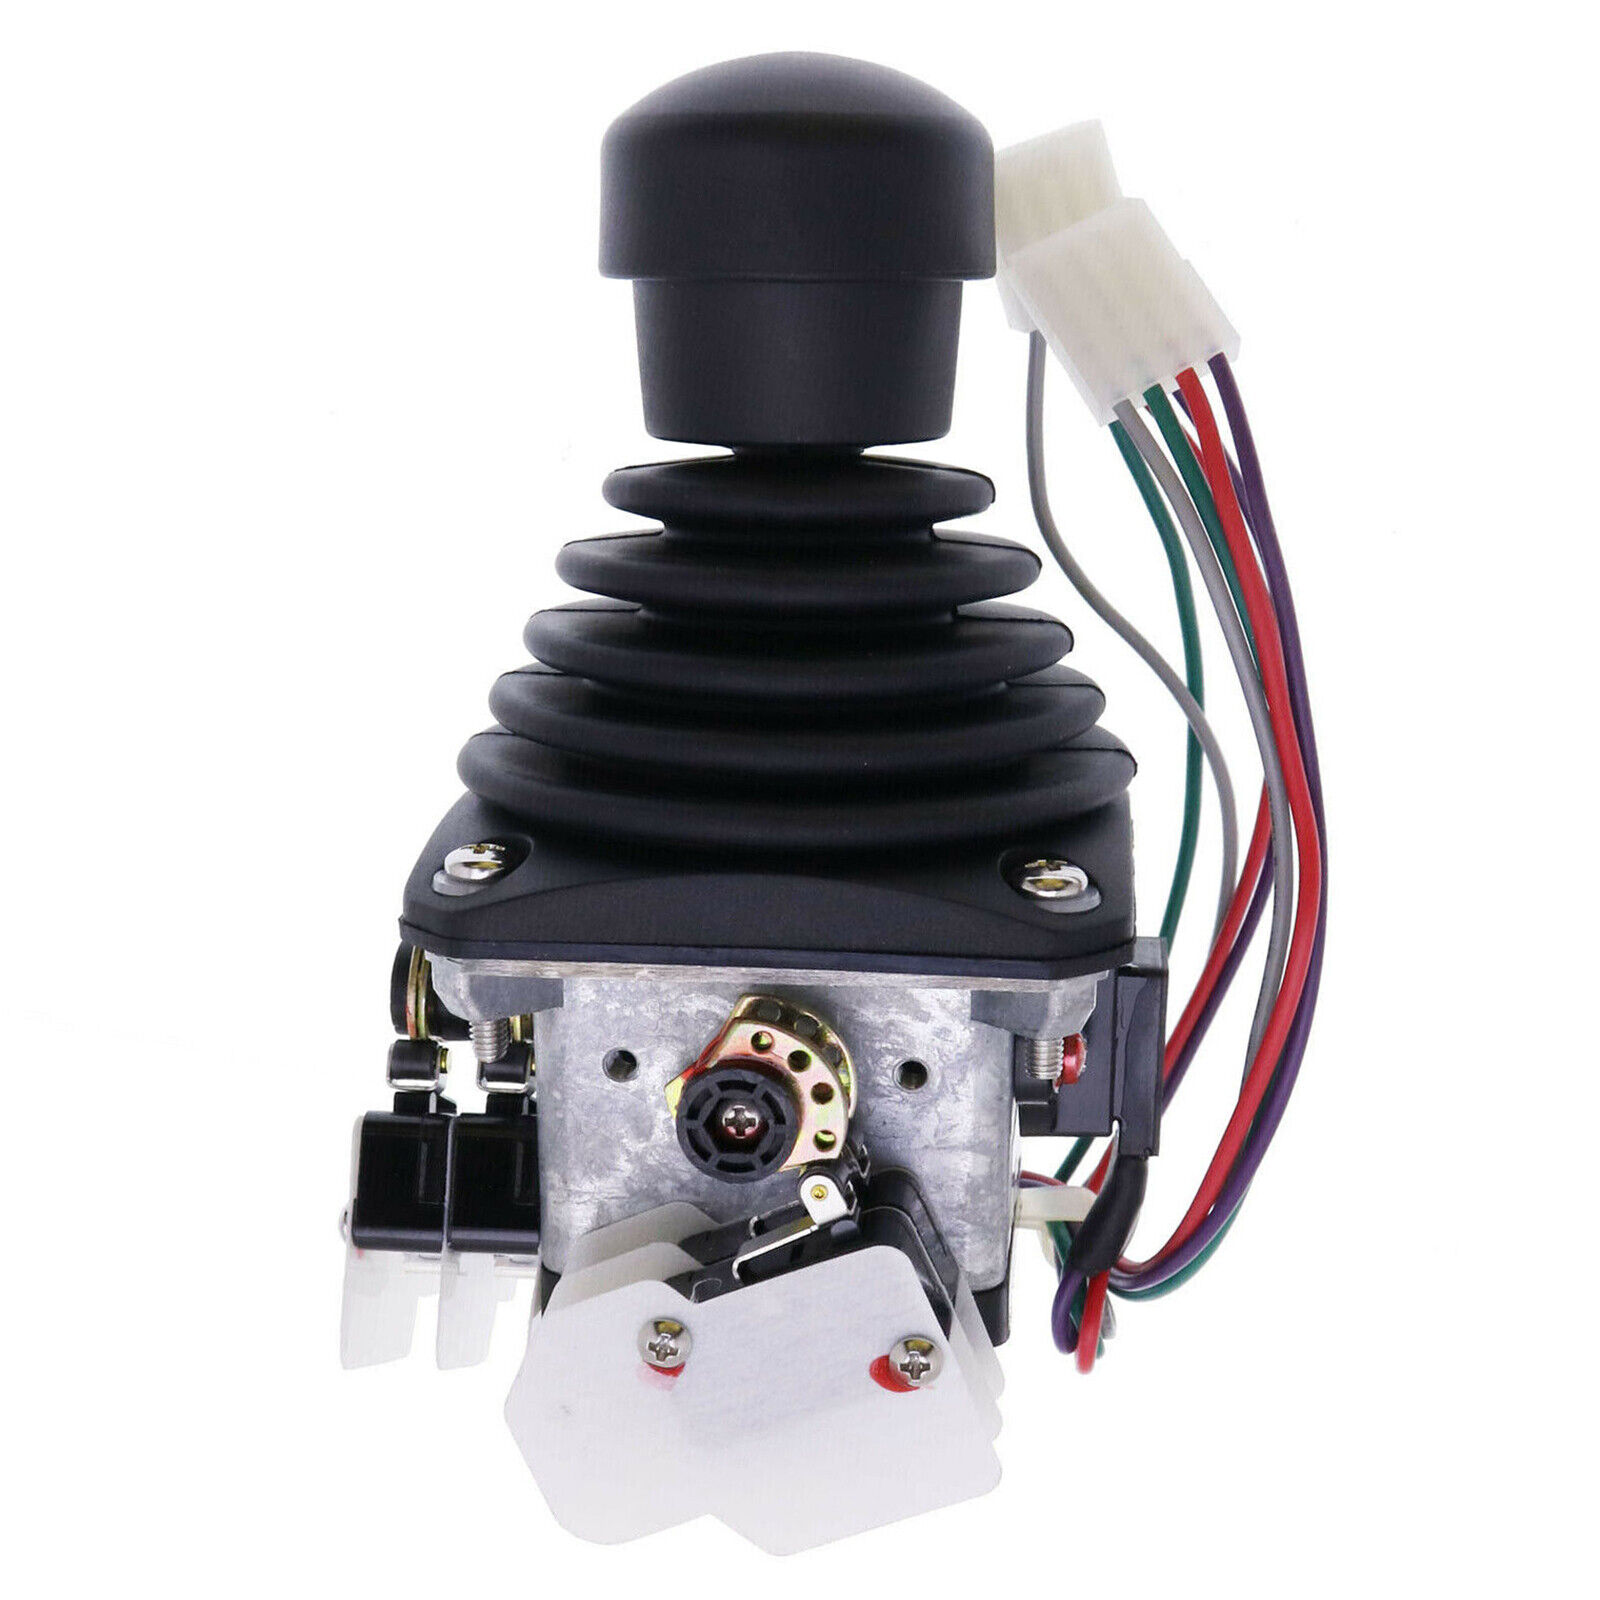 New Joystick Controller 72278 for Genie Z-45/22 Z45-22 RT Articulated Boom Lift